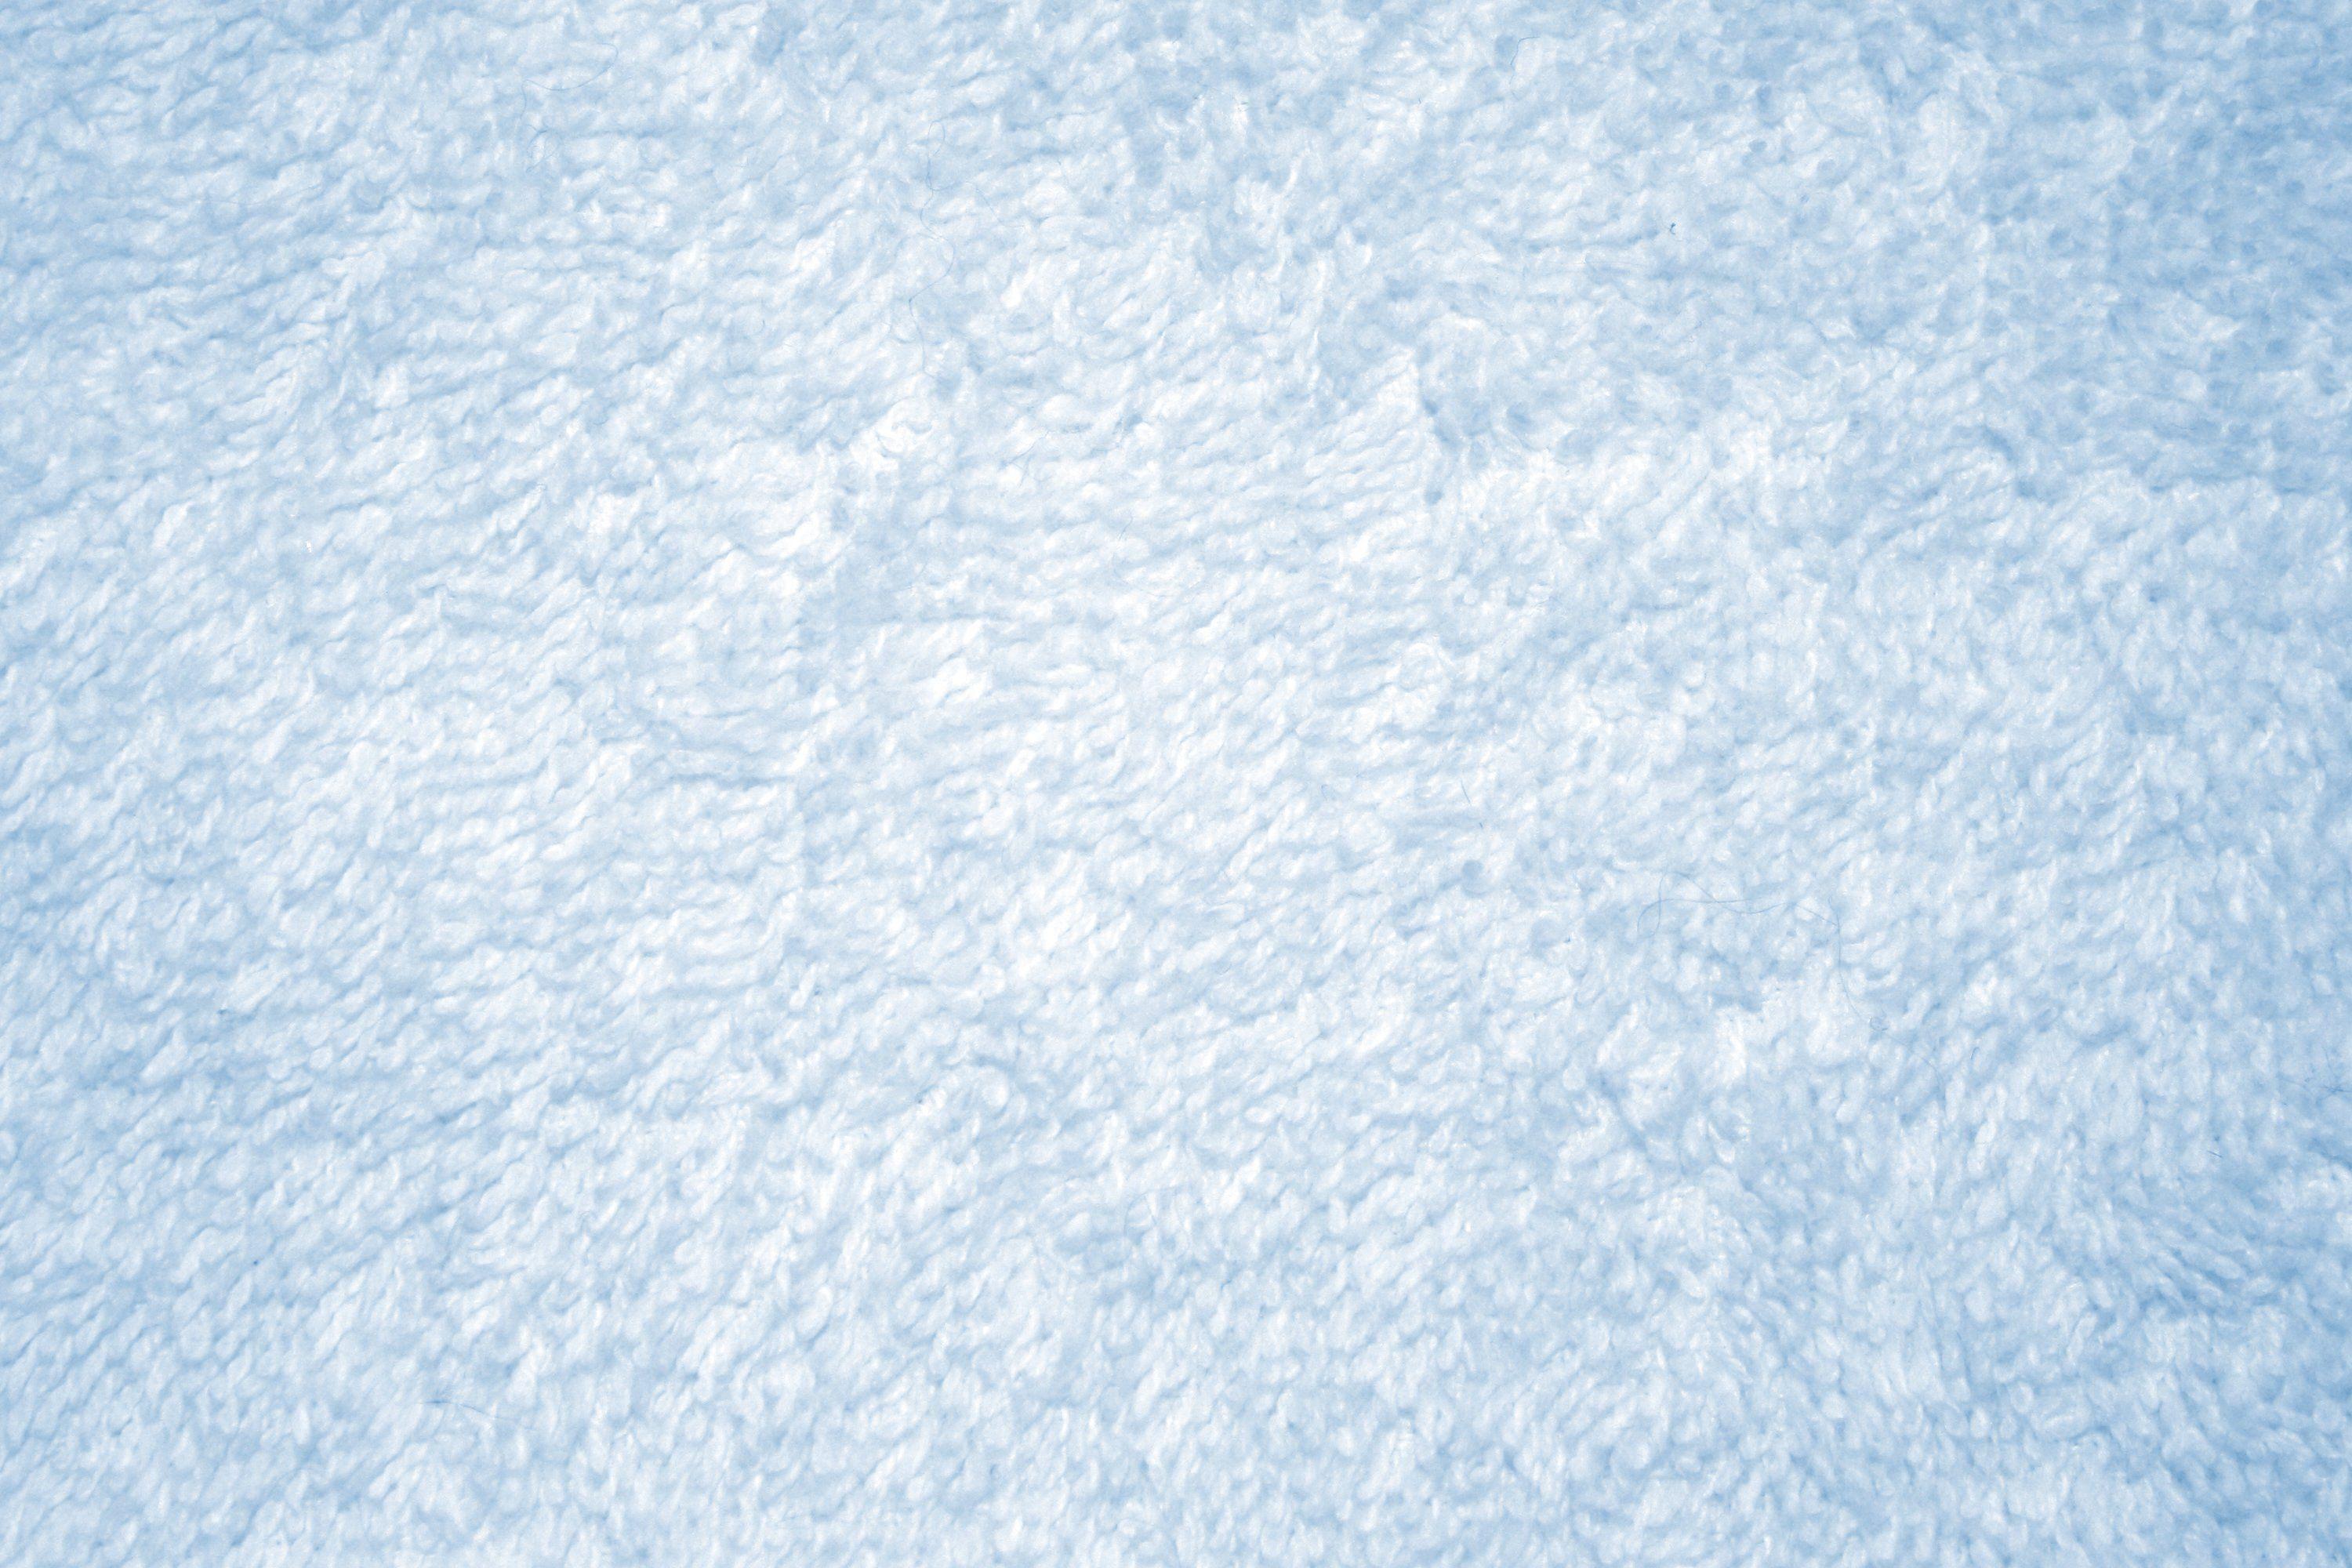 Light Blue Terry Cloth Texture Picture. Free Photograph. Photo